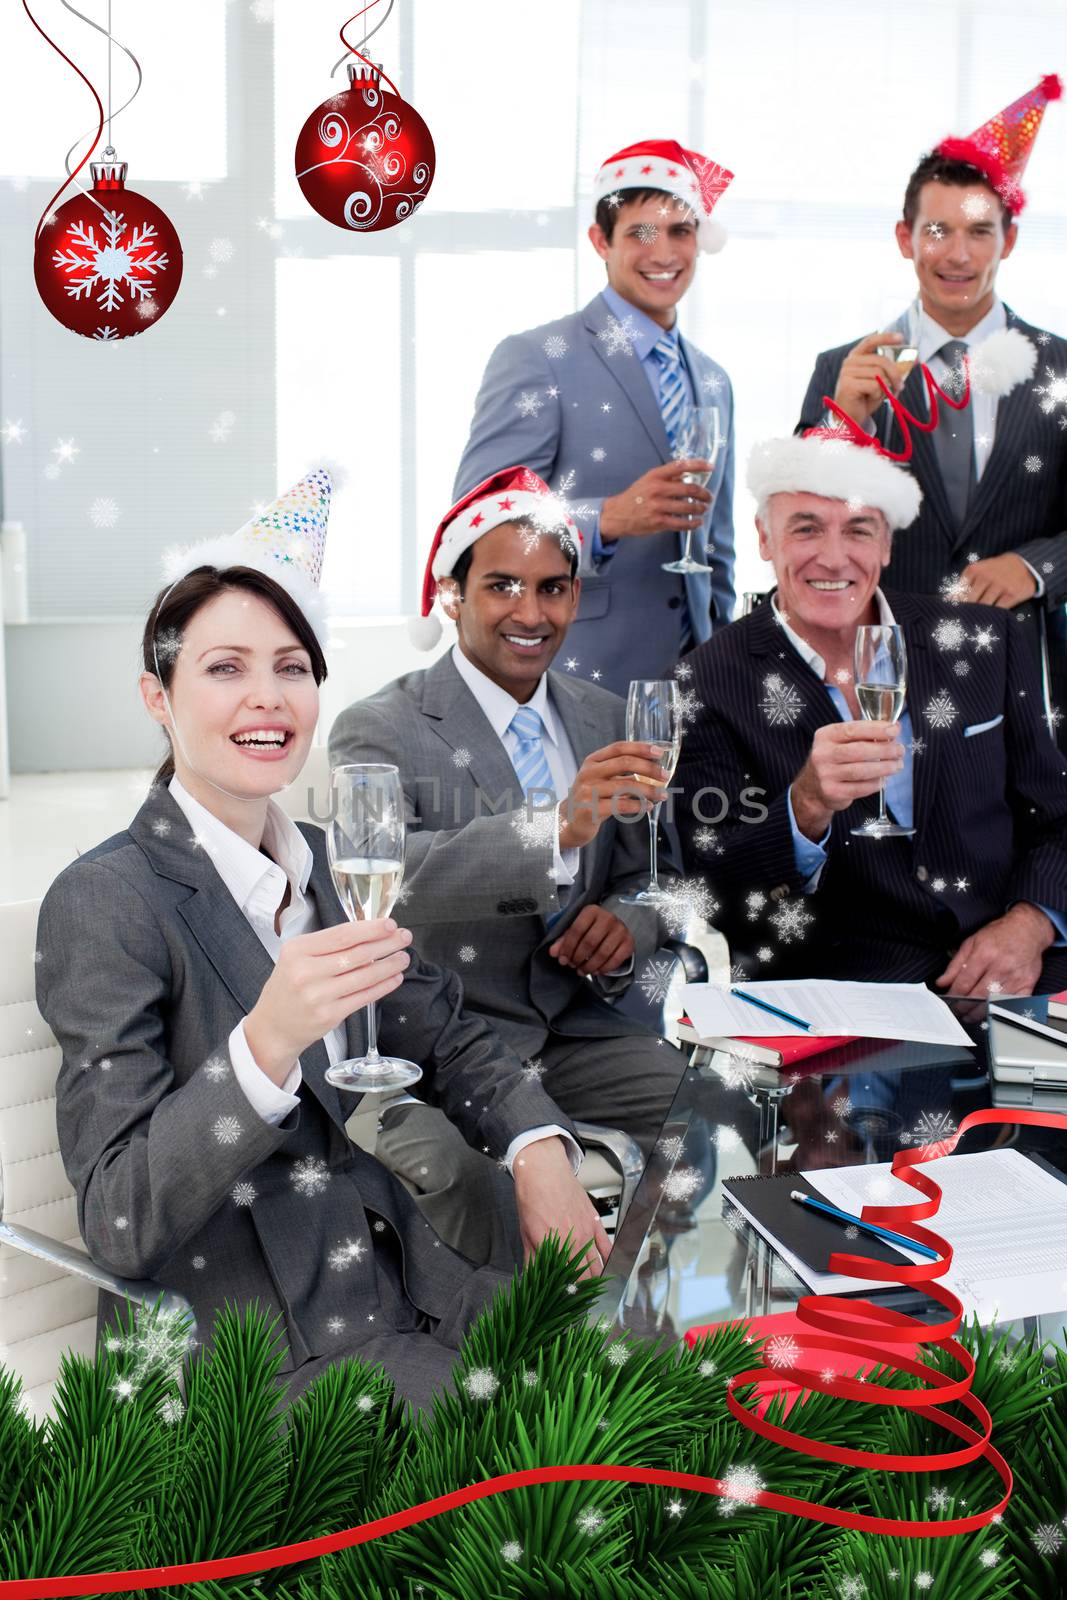 Manager and his team with novelty christmas hat toasting at a party by Wavebreakmedia